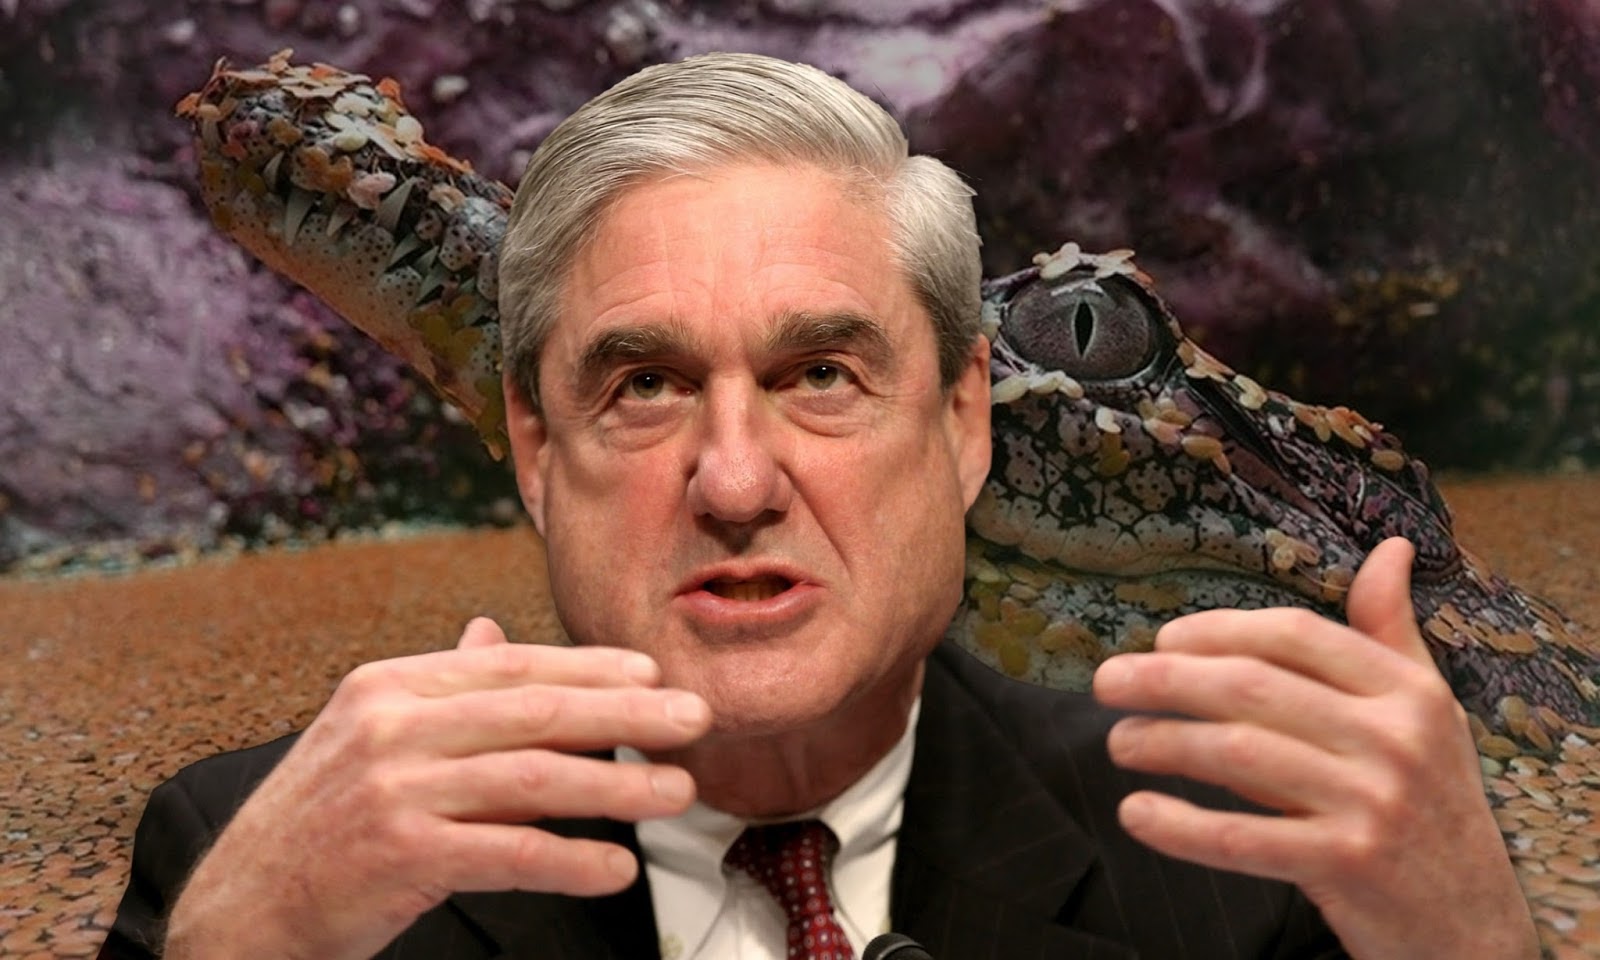 PROOF: ROBERT MUELLER CANNOT BE IMPARTIAL IN THE RUSSIA INVESTIGATION